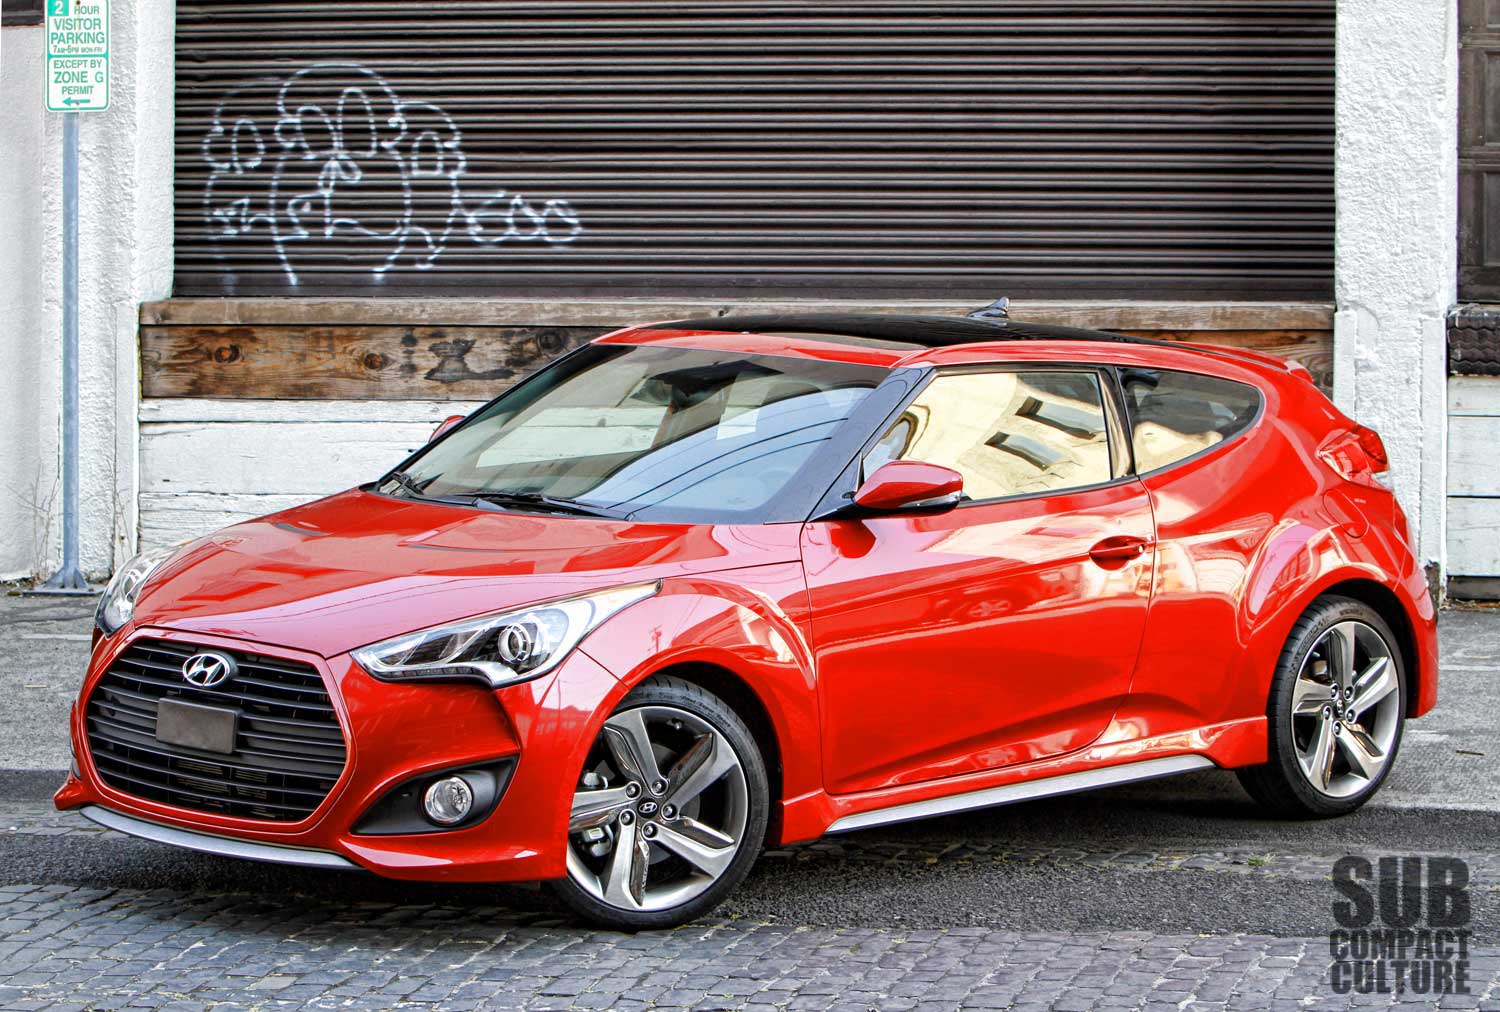 Subcompact Culture - The small car blog: Review: 2013 Hyundai Veloster  Turbo: Adding some much needed grunt to a unique compact